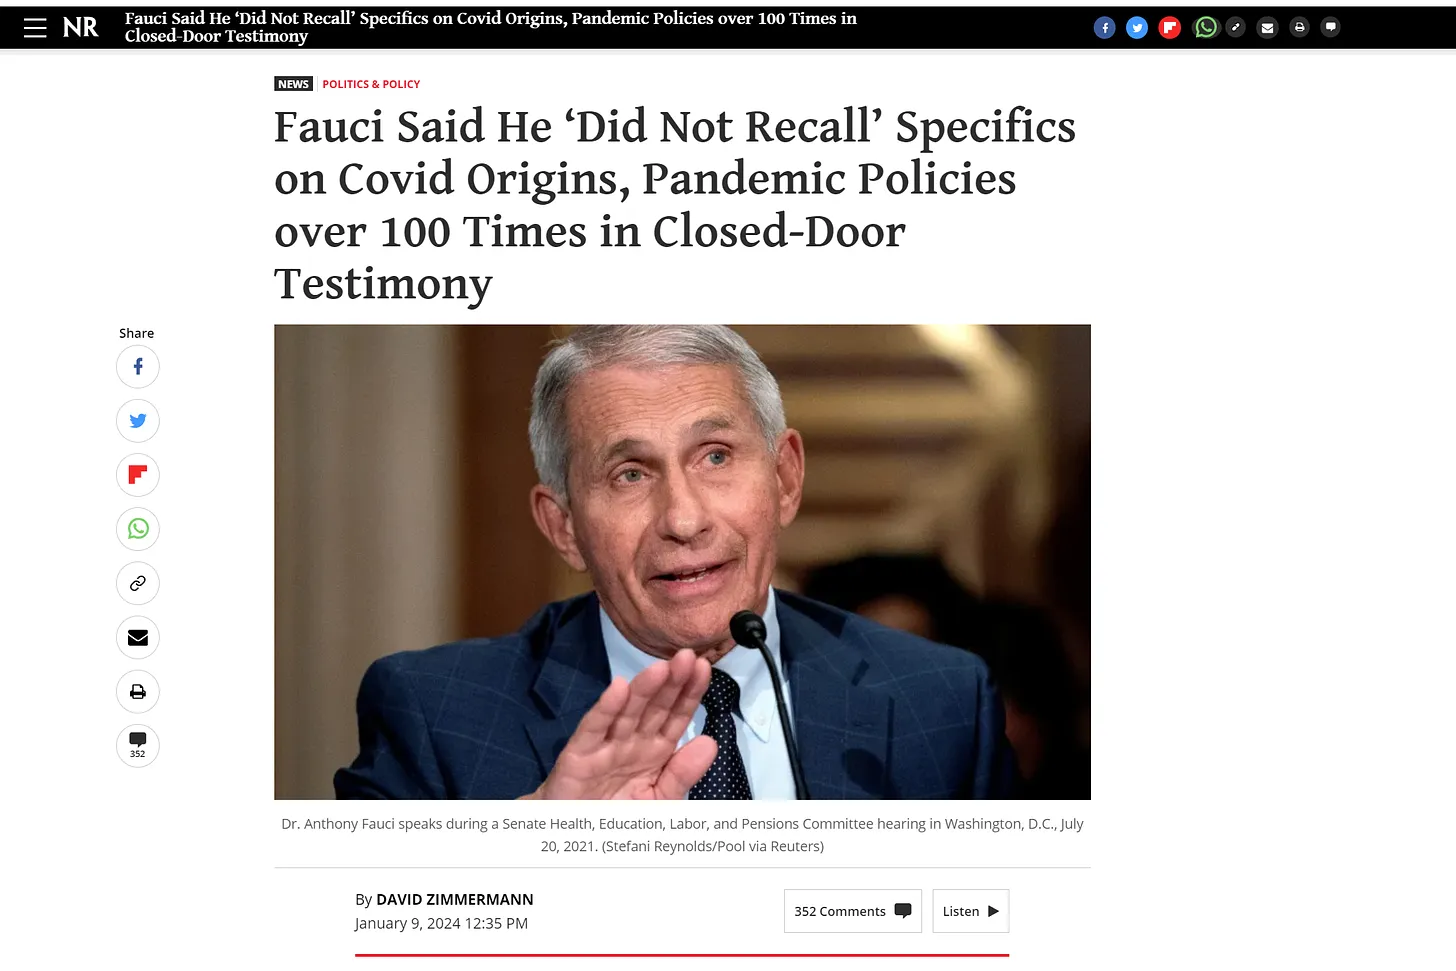 Fauci's testimony on Capitol Hill was that of a guilty man